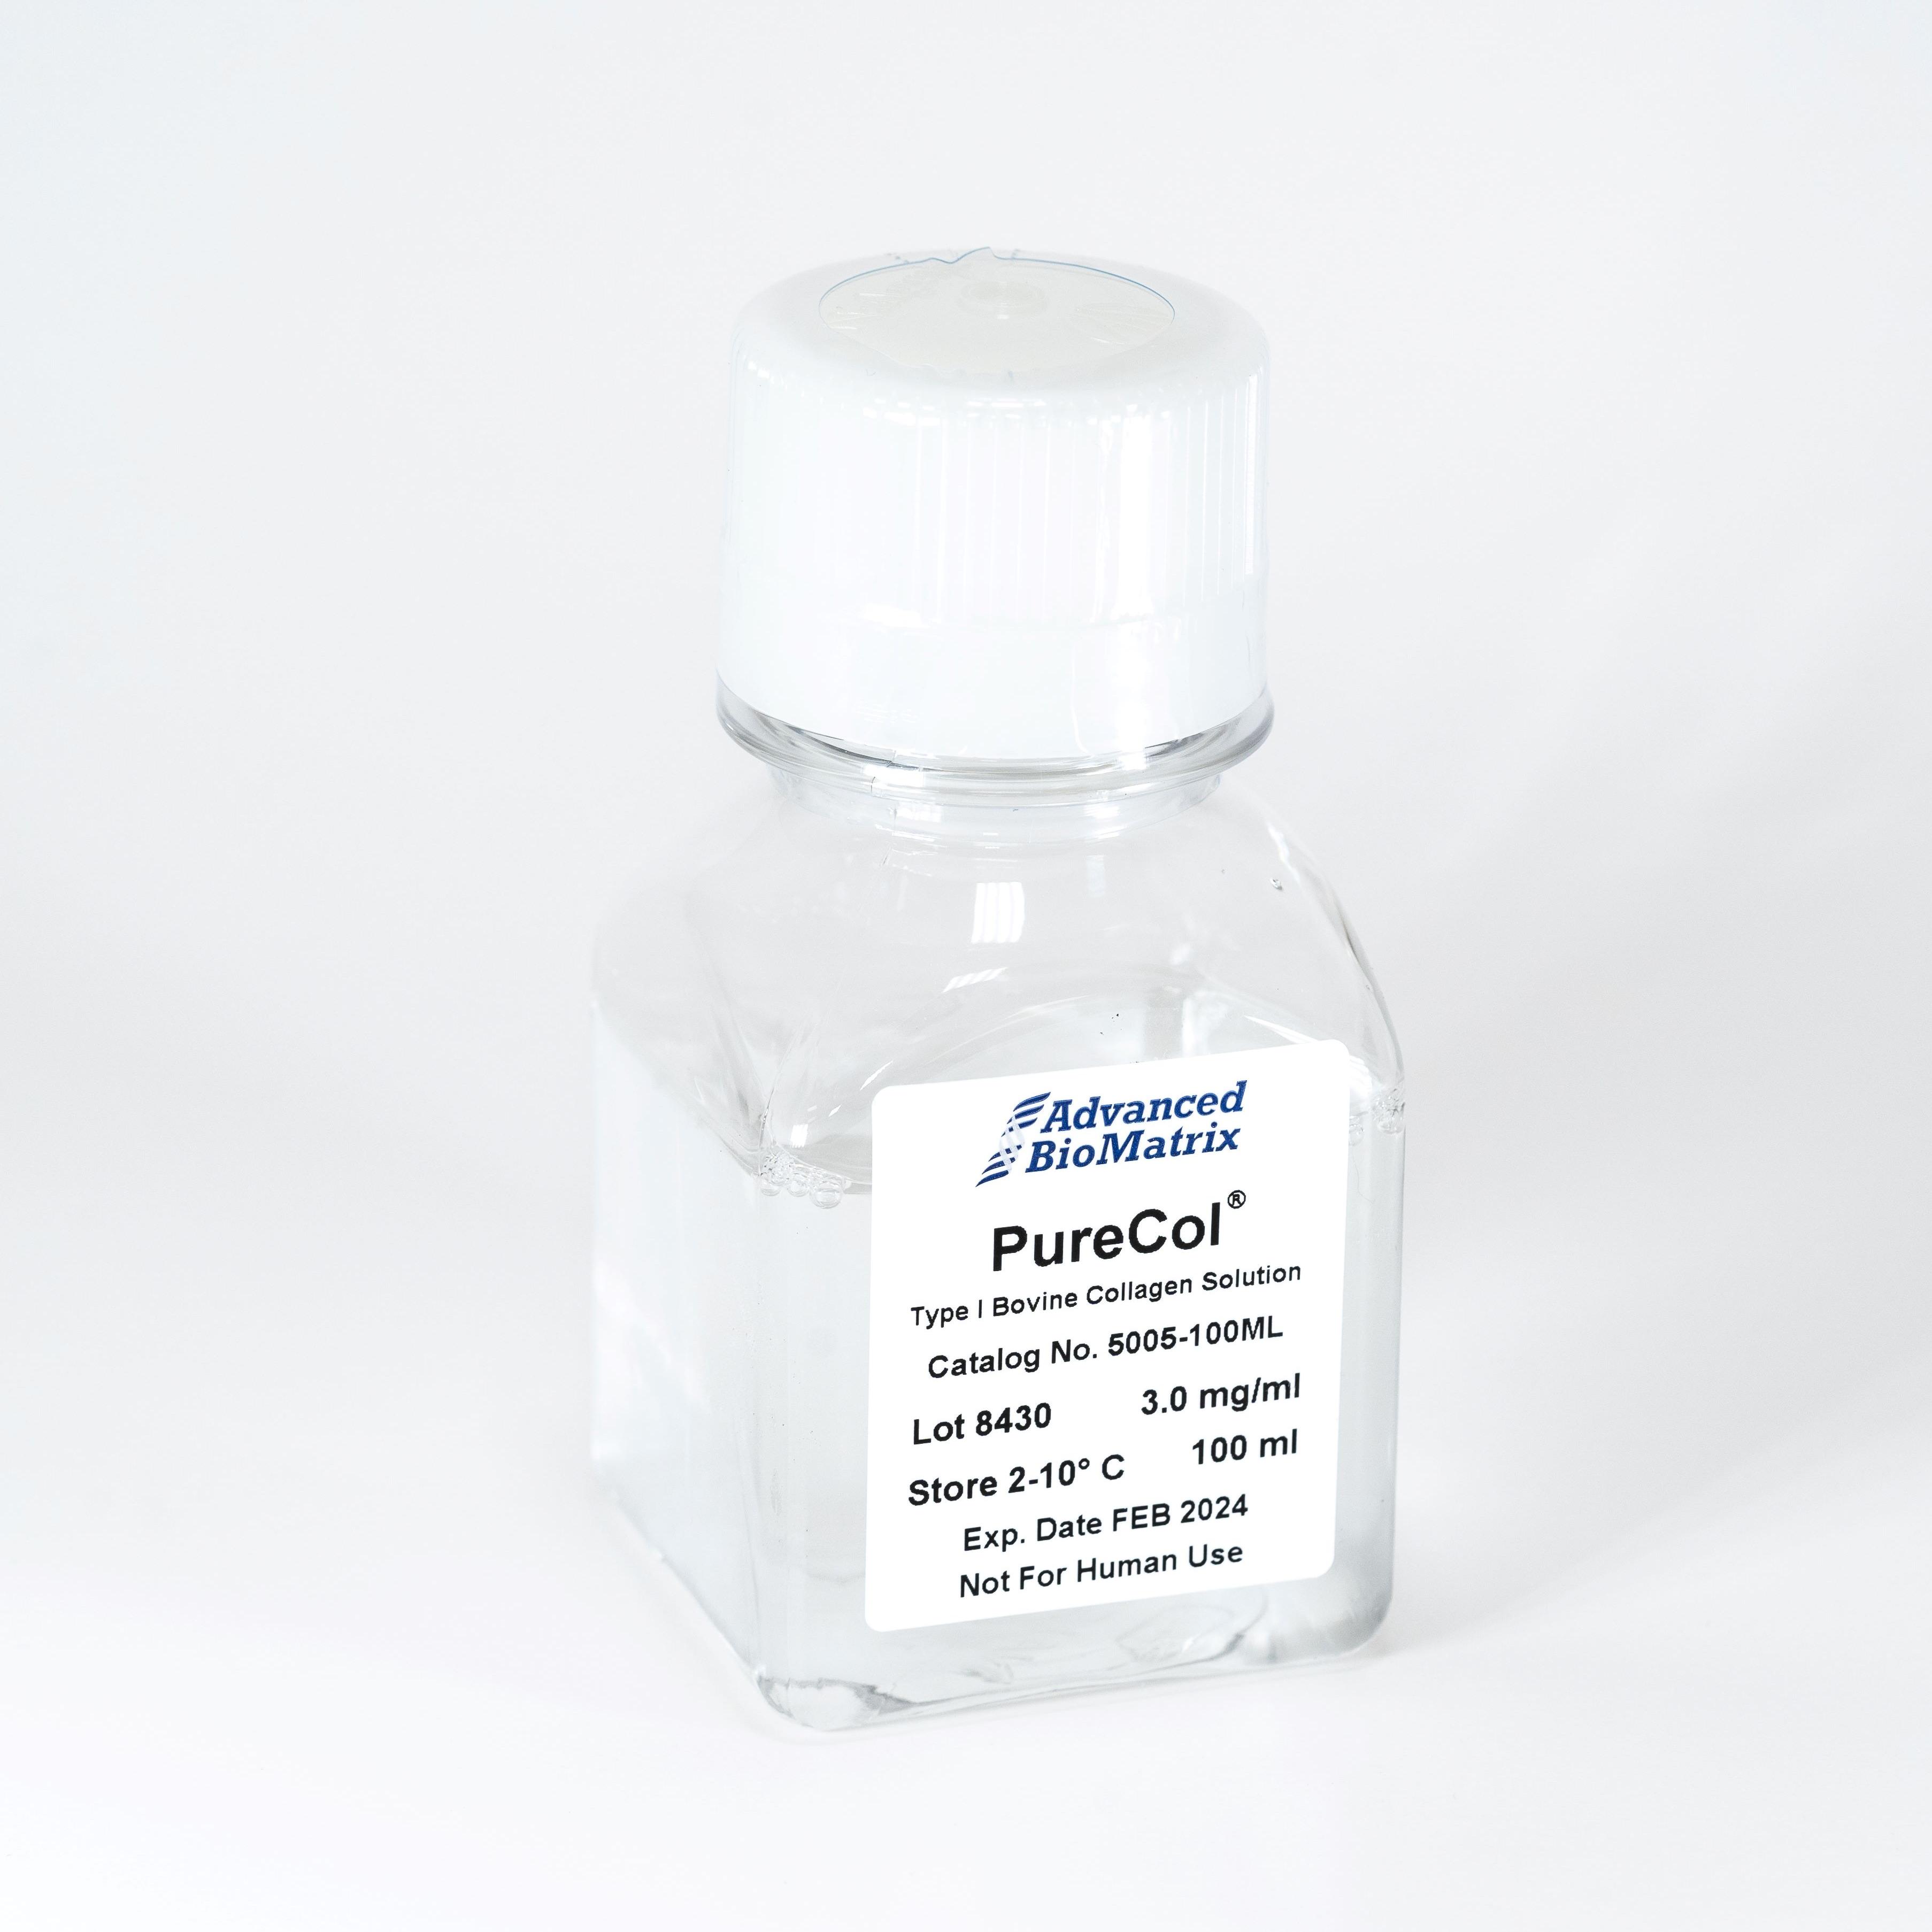 PureCol Type I Collagen Solution, 3 mg/ml from Advanced BioMatrix